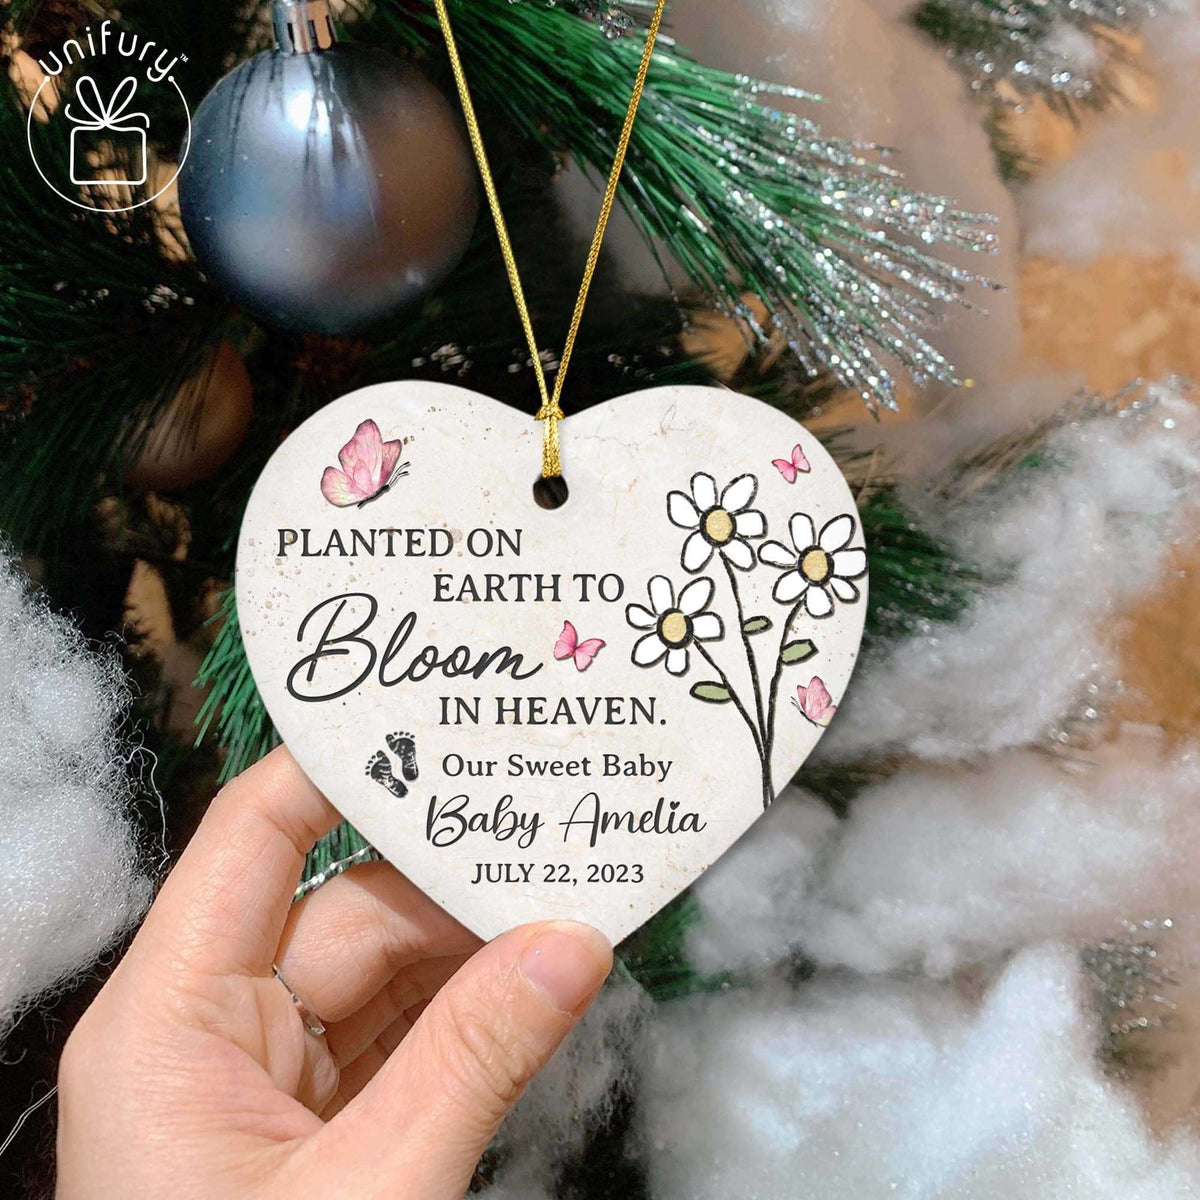 We Hold You Close Butterfly Baby Memorial Ceramic Heart Ornaments